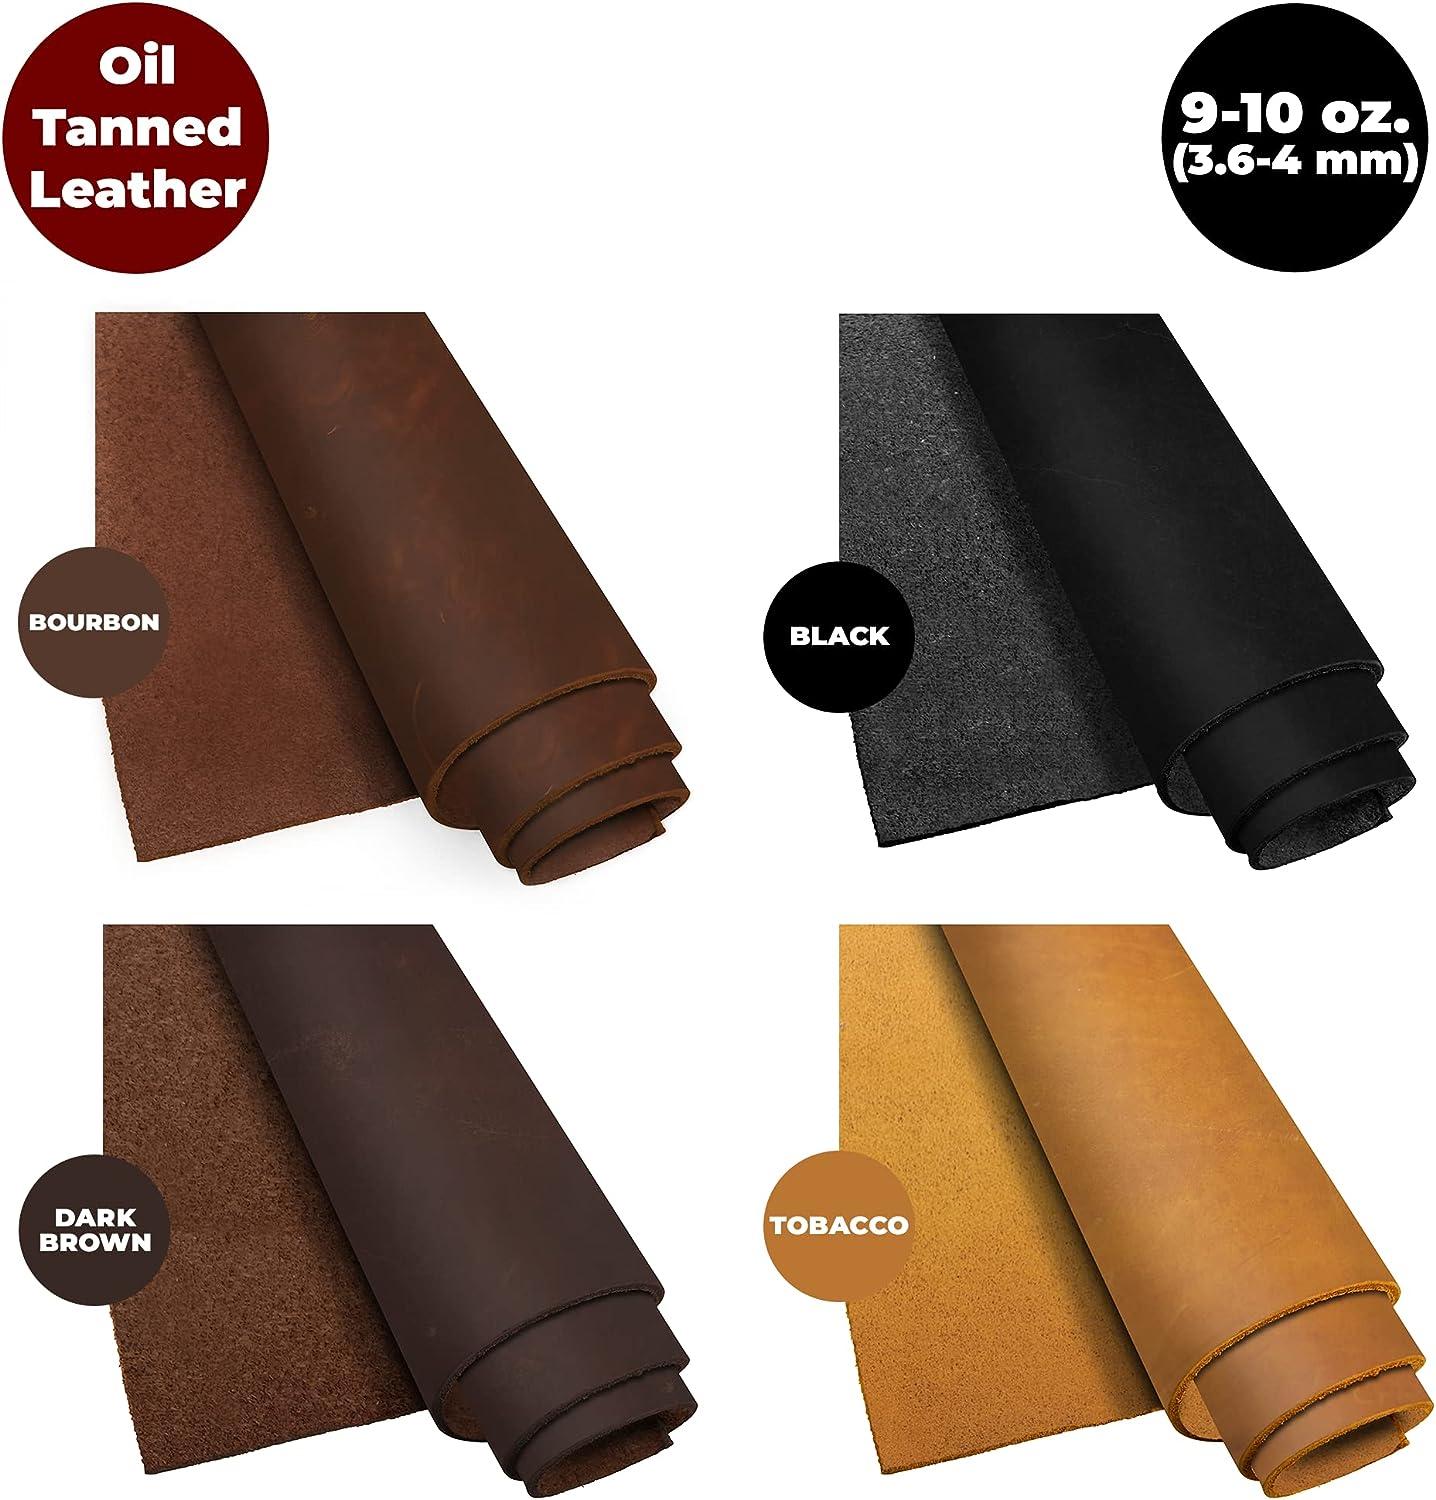 European Leather Work 5-6 oz. 2-2.4mm Vegetable Tanned Leather Pre-Cut  Size: 10x10 - Tobacco - Natural Shrunken Grain Cowhide Craftsmen Grade  Quality for Tooling, Carving, Engraving, Molding 